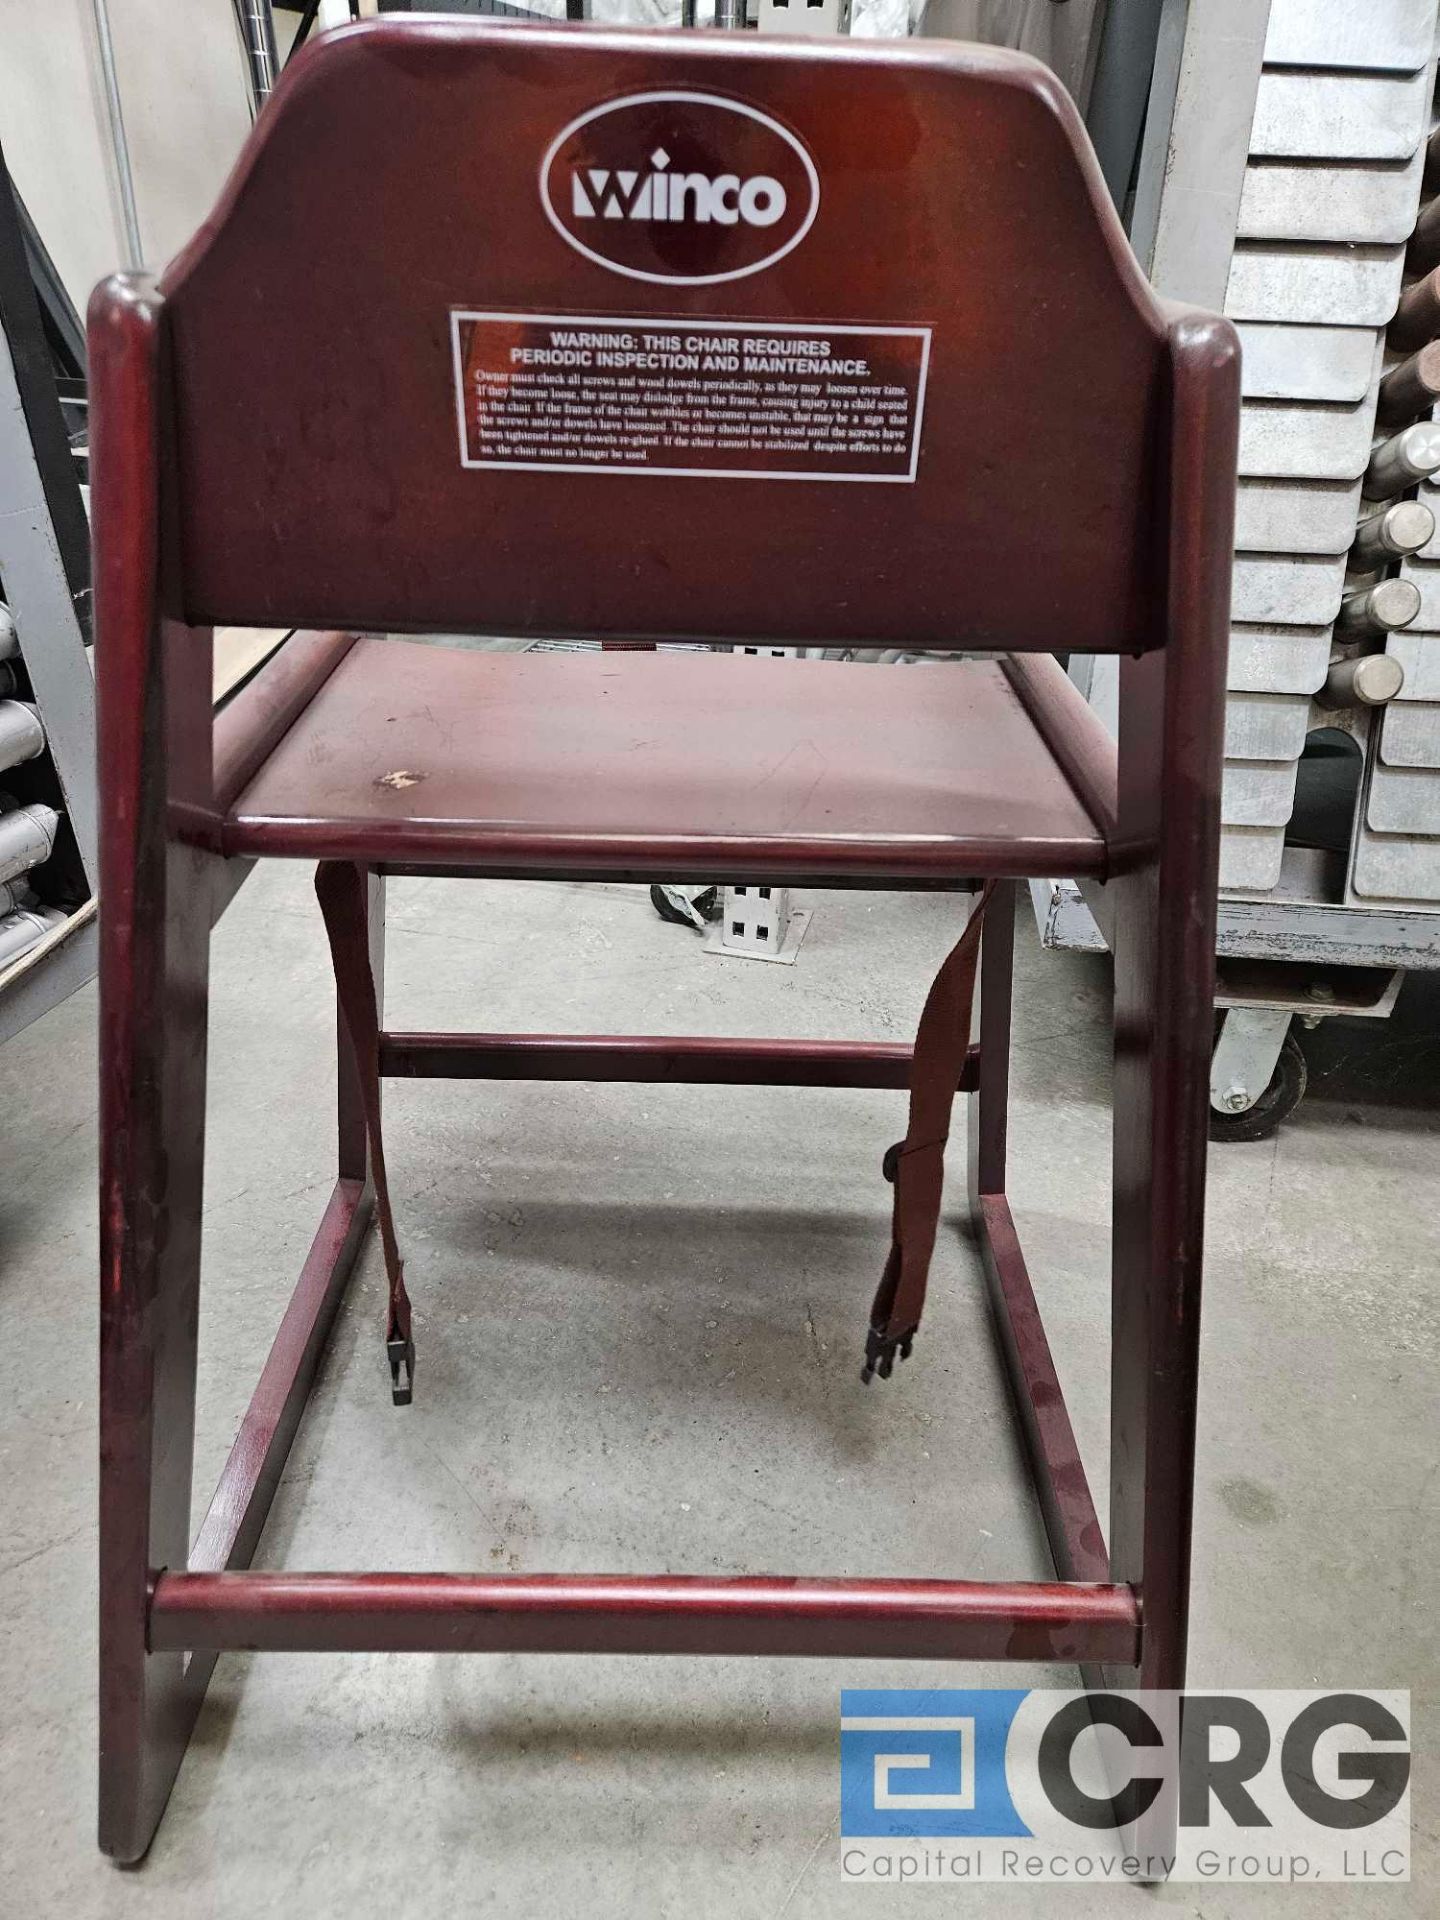 Winco High Chairs - Image 2 of 2